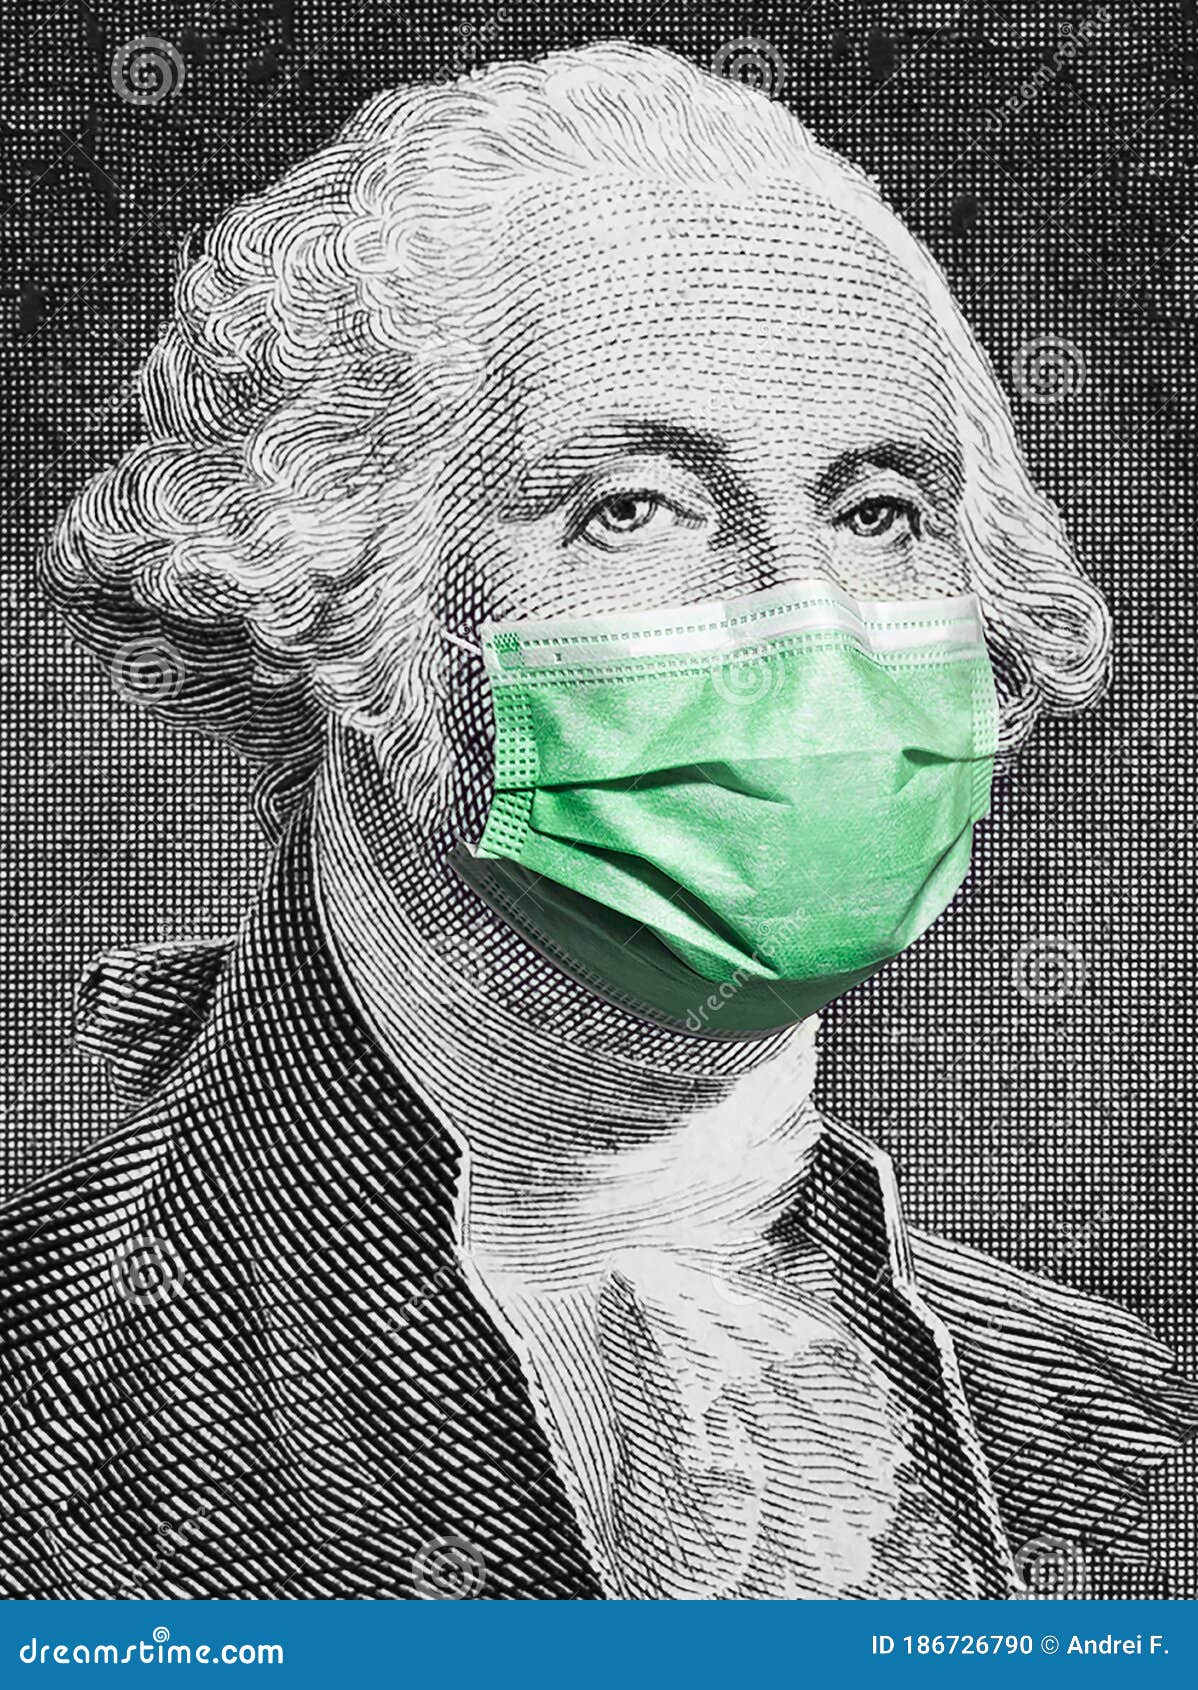 portrait of george washington from the 100 american dollar banknote, wearing medical face mask against covid-19 infection.